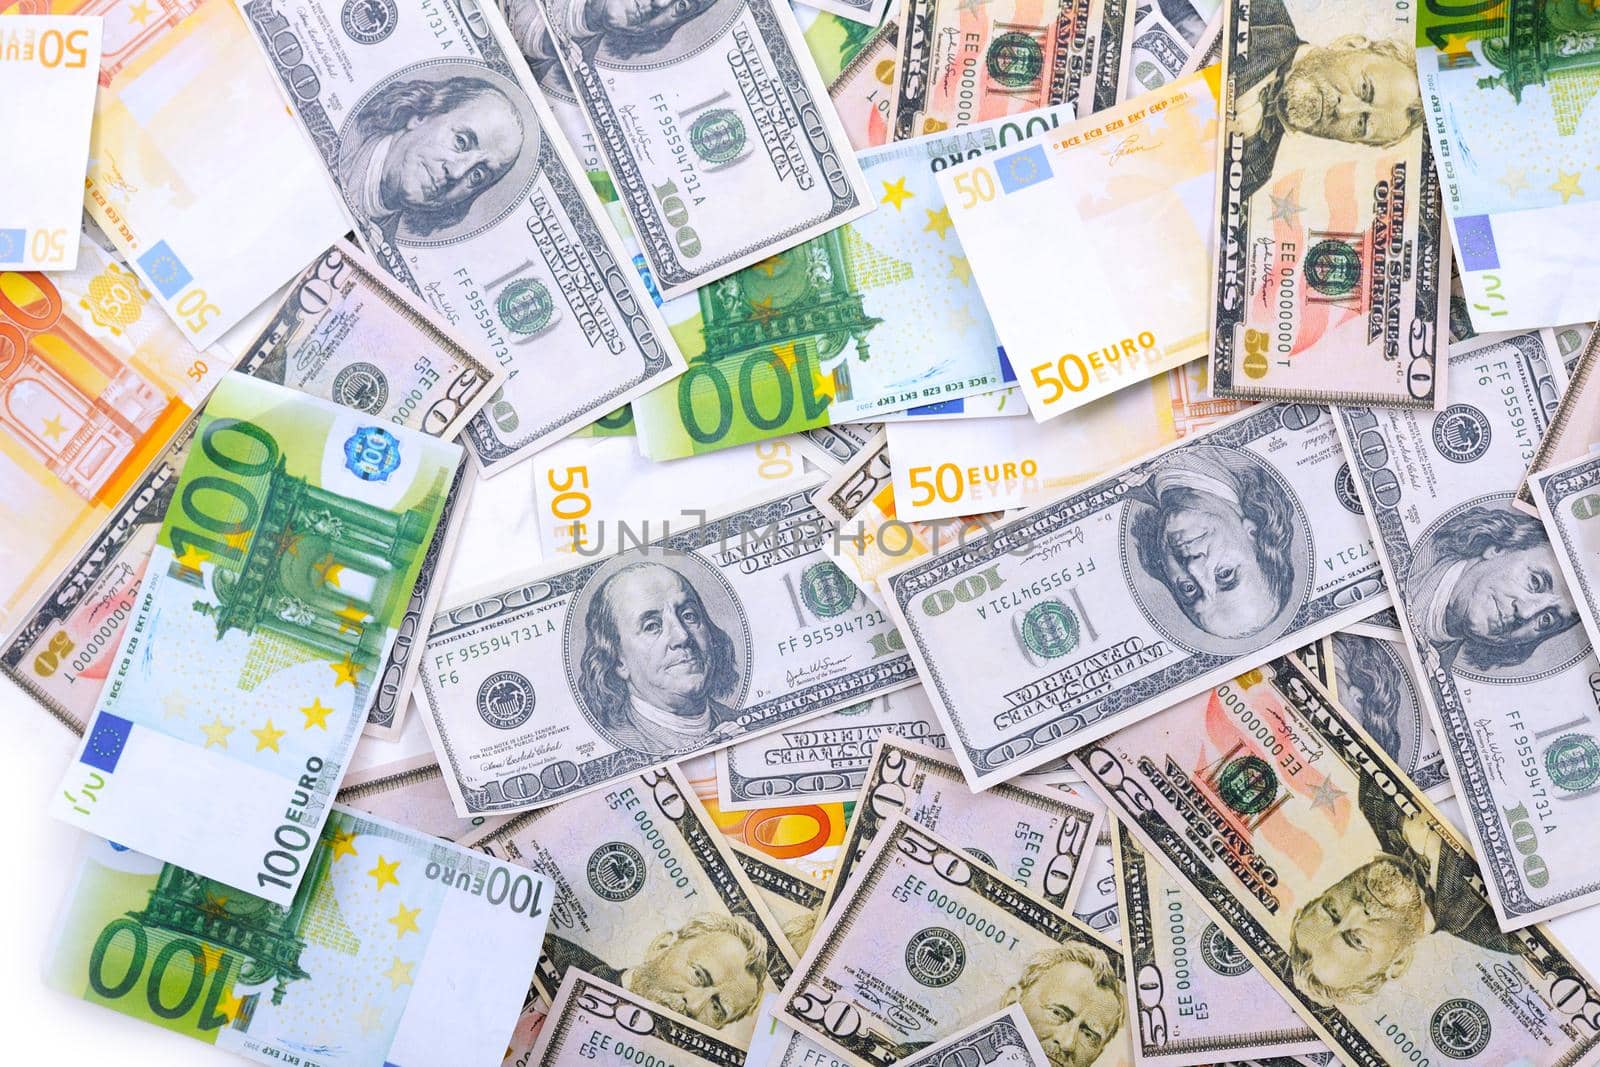 business money background with us dollars and european euro